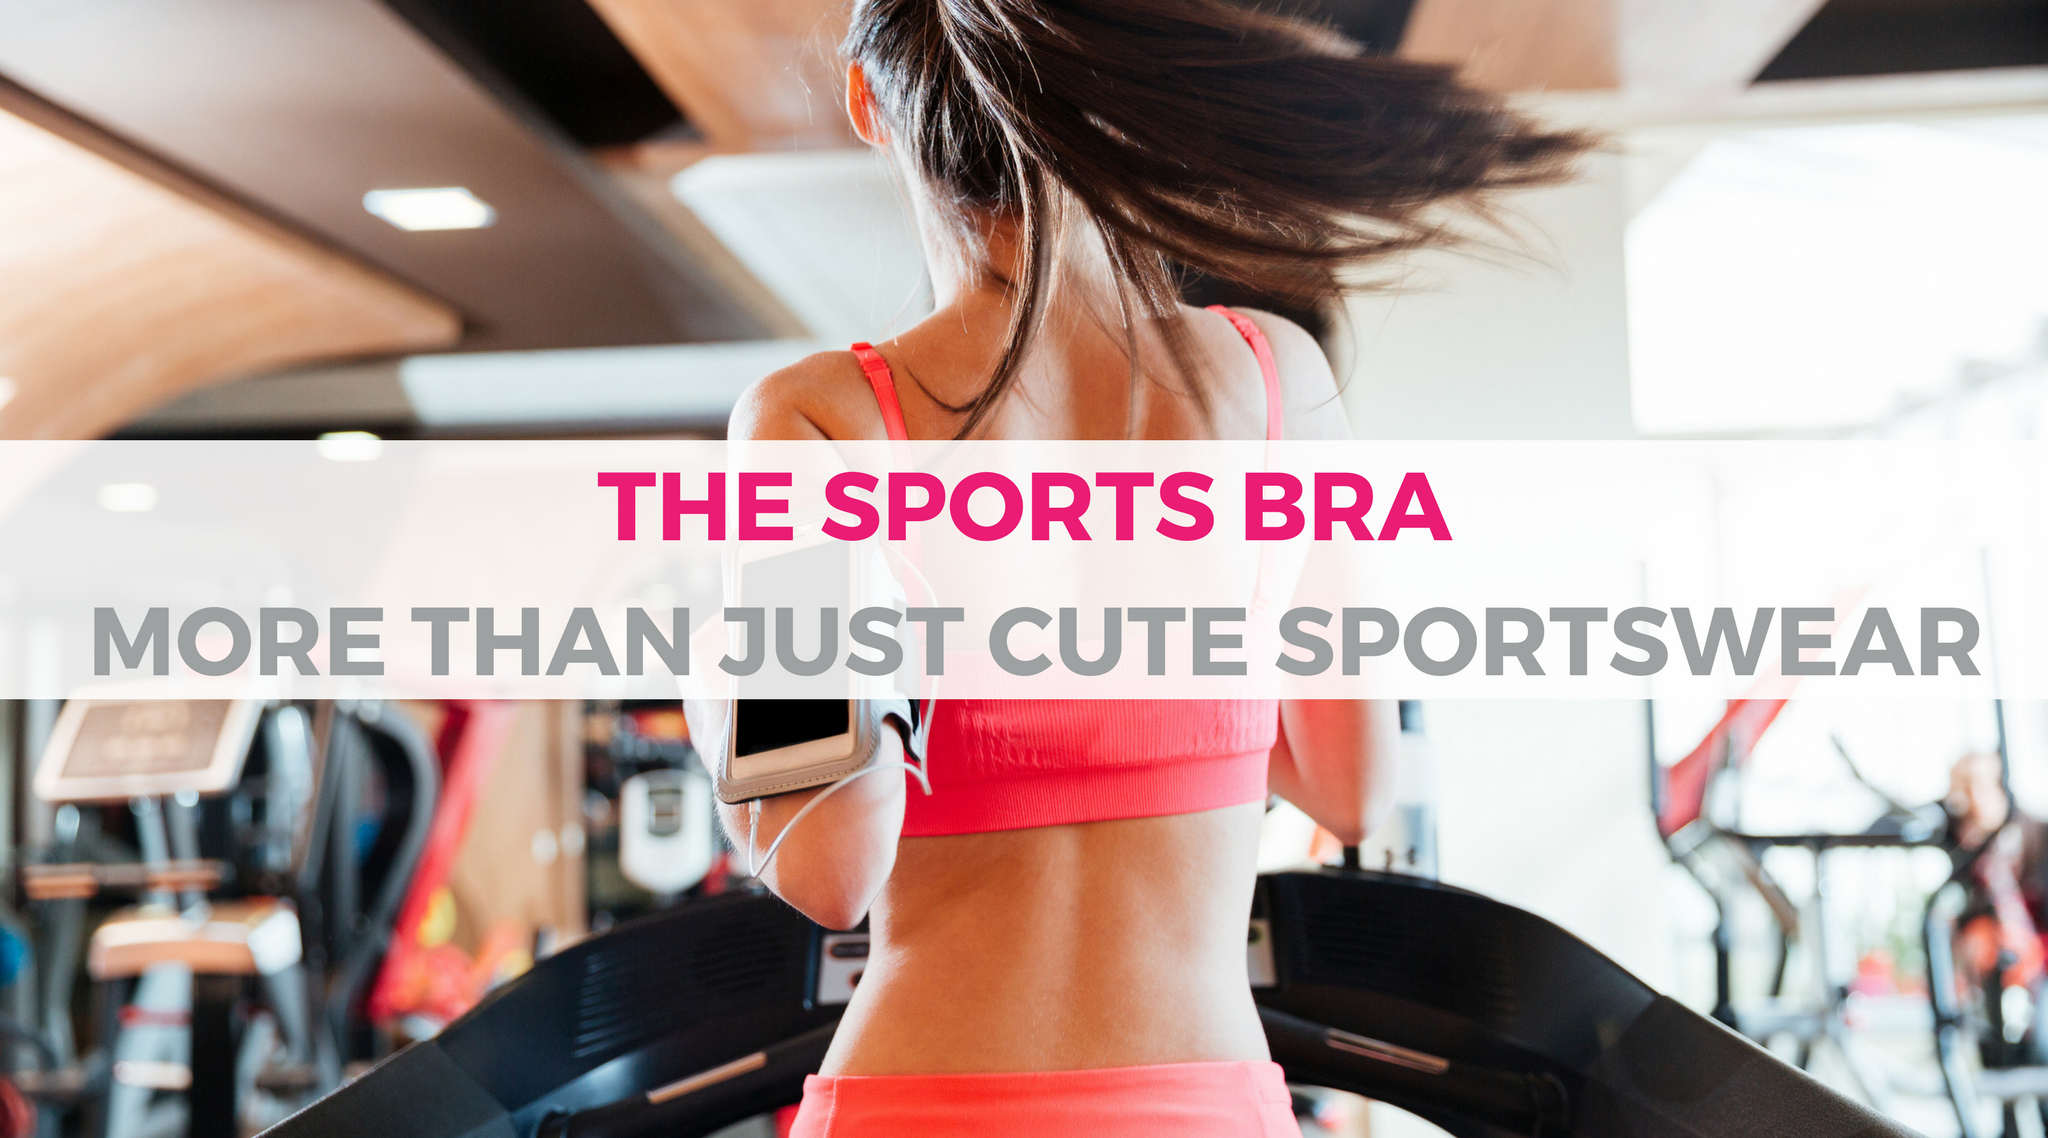 Wearing the wrong size or type of sports bra when you workout can lead to neck & back pain, breast pain & damage to the ligaments inside the breast. This can then lead to saggy breasts & stretch marks. Is looking super cute at the gym in your sports bra worth all that? Click to learn 10 ways you can tell if it’s time to look for in your new sports bra from #Shefit blog. #SportsBras #LargeBreasts #SportsBraForGym #ActiveWearWomen #FitnessGear #SportsWear #ExerciseWear #FitnessGirl #FitnessGear 